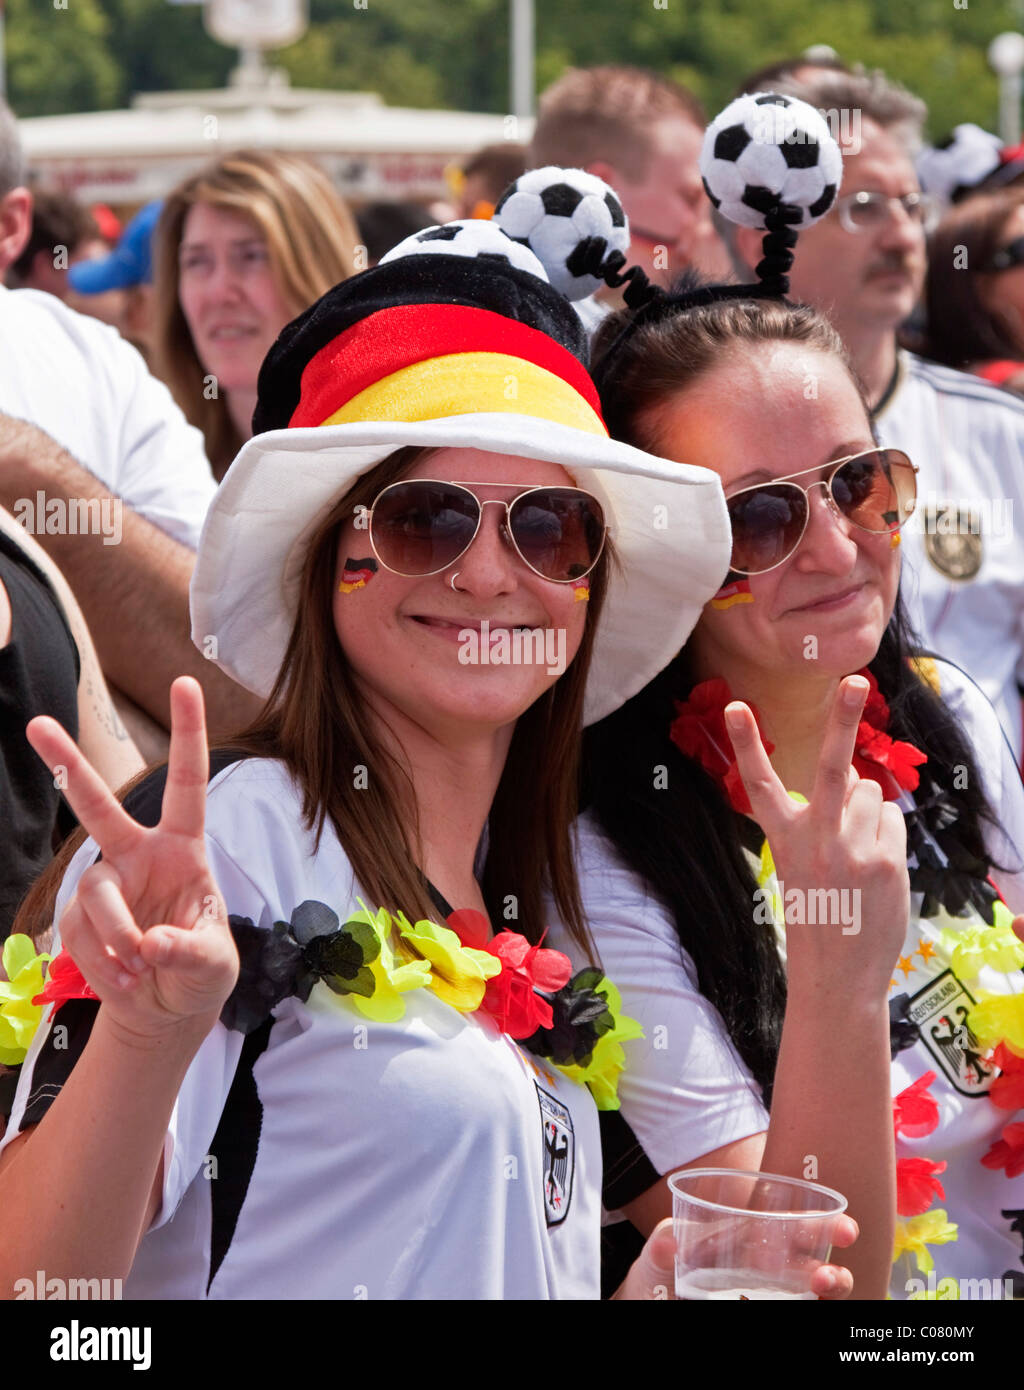 Two female soccer fans attending the public screening in front of the Olympic Stadium during the FIFA World Cup 2010, watching Stock Photo